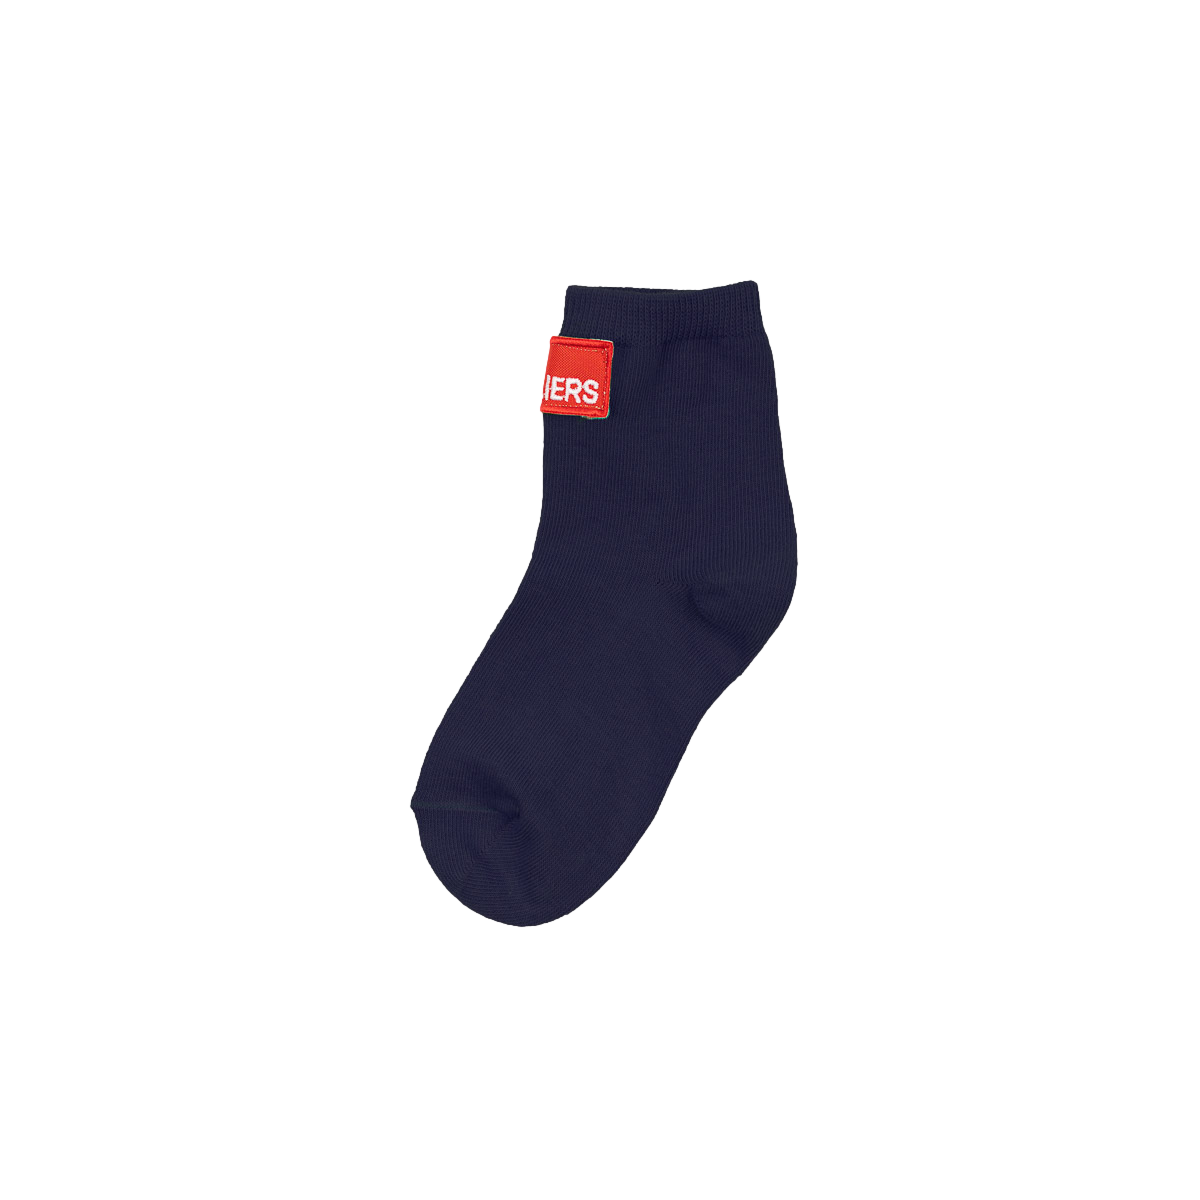 Les ecoliers Socks Navy